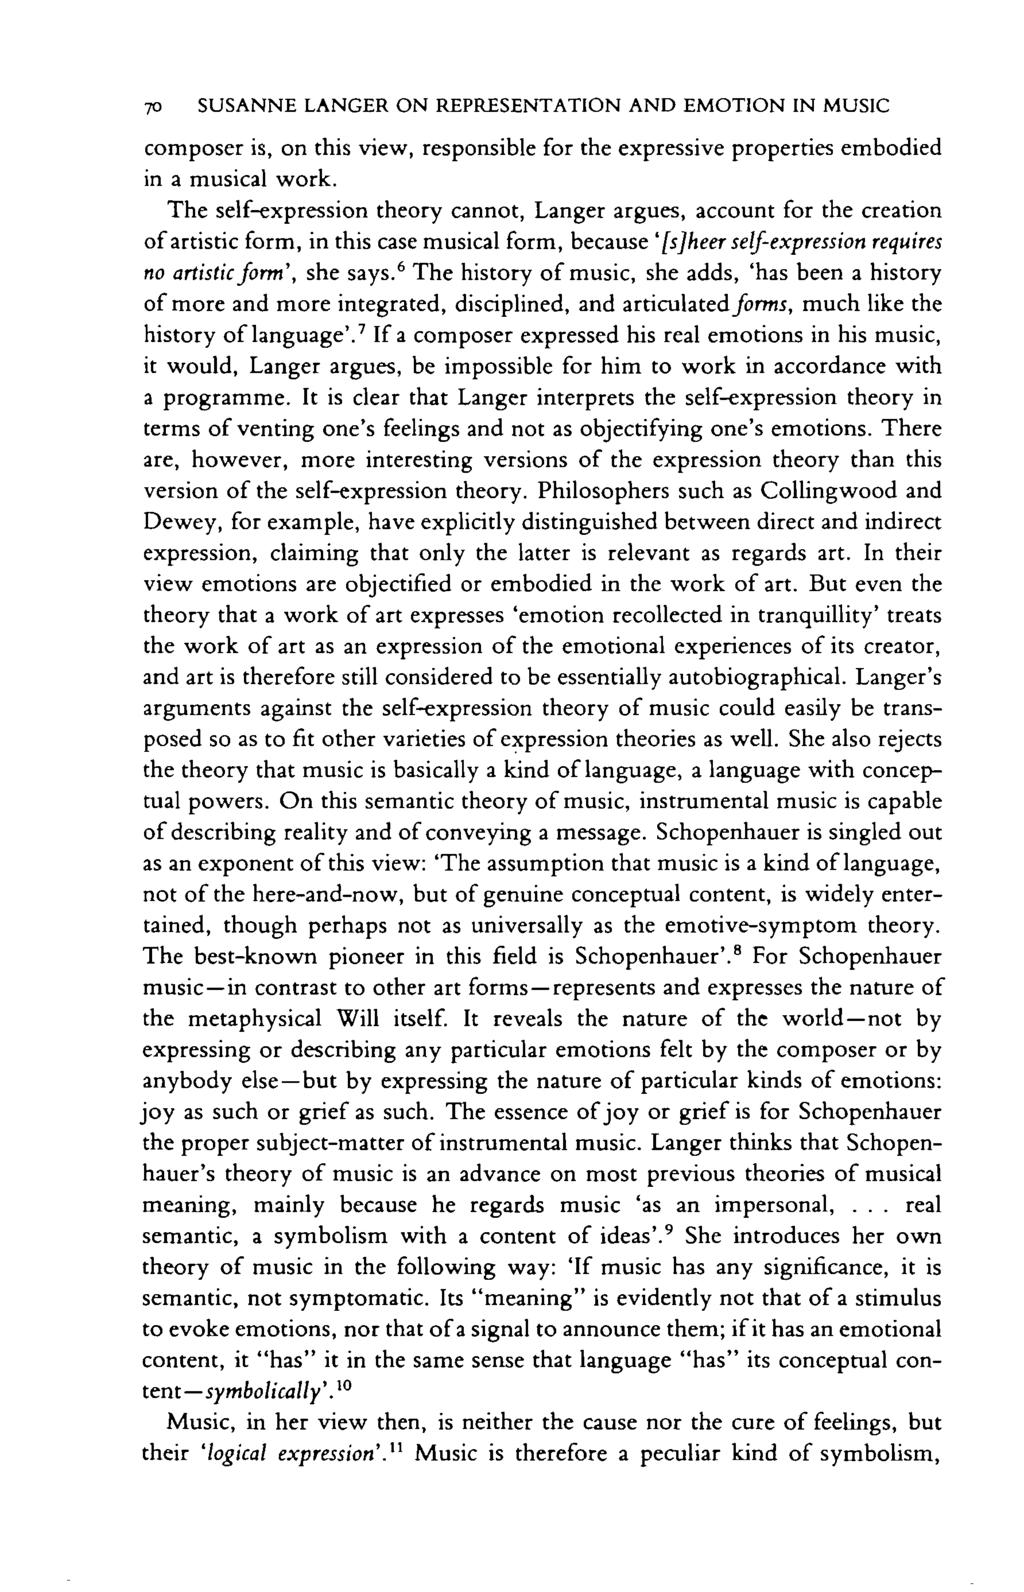 70 SUSANNE LANGER ON REPRESENTATION AND EMOTION IN MUSIC composer is, on this view, responsible for the expressive properties embodied in a musical work.